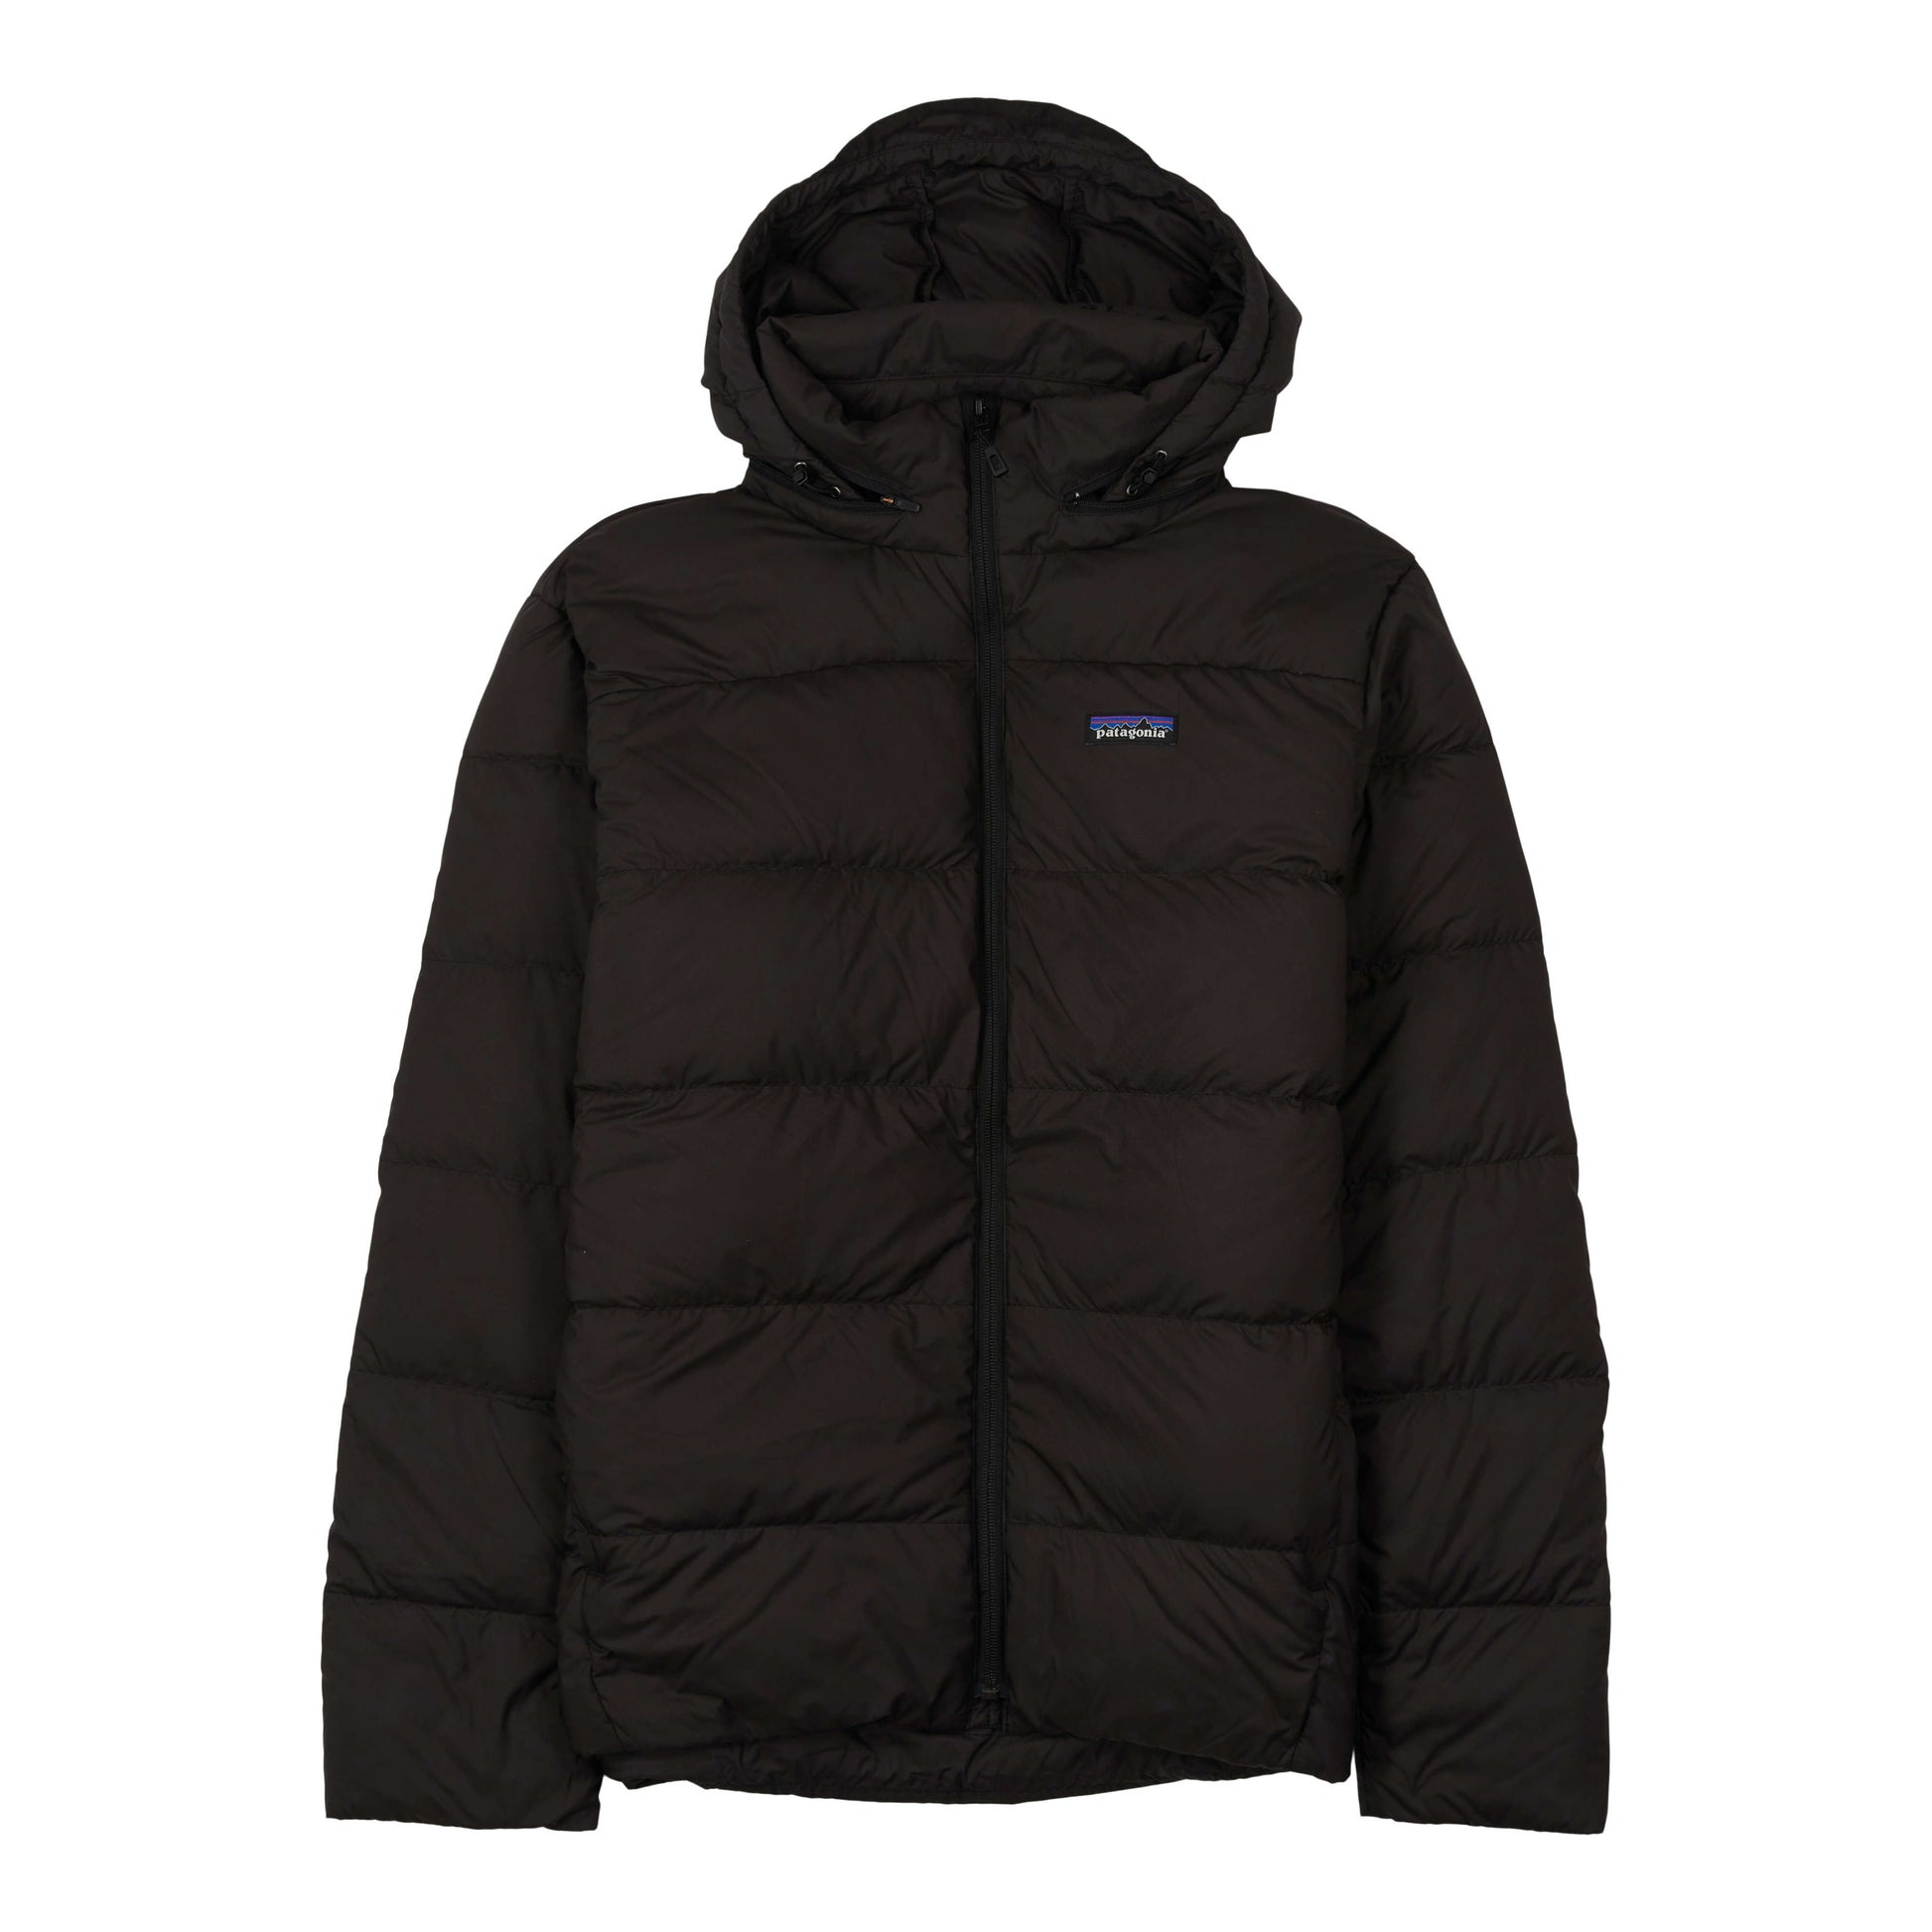 Patagonia Men's Classic Navy Silent Down Jacket